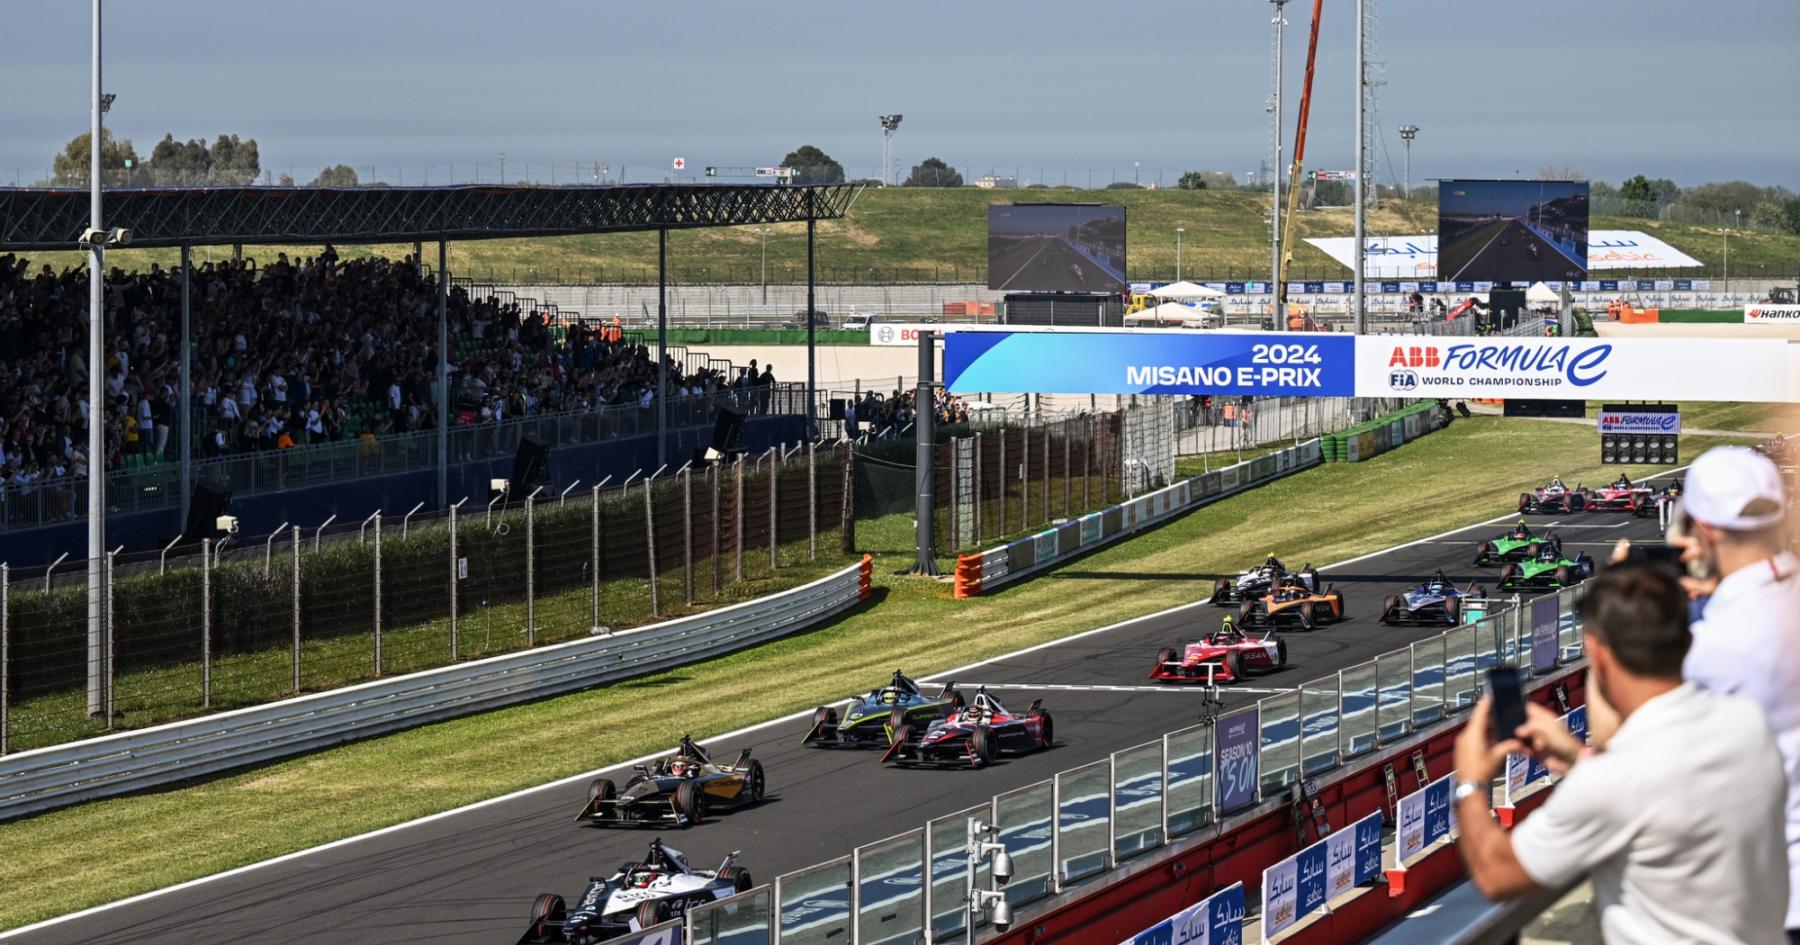 Revving up for the Future: Misano E-Prix Makes Mark on Electric Racing Scene